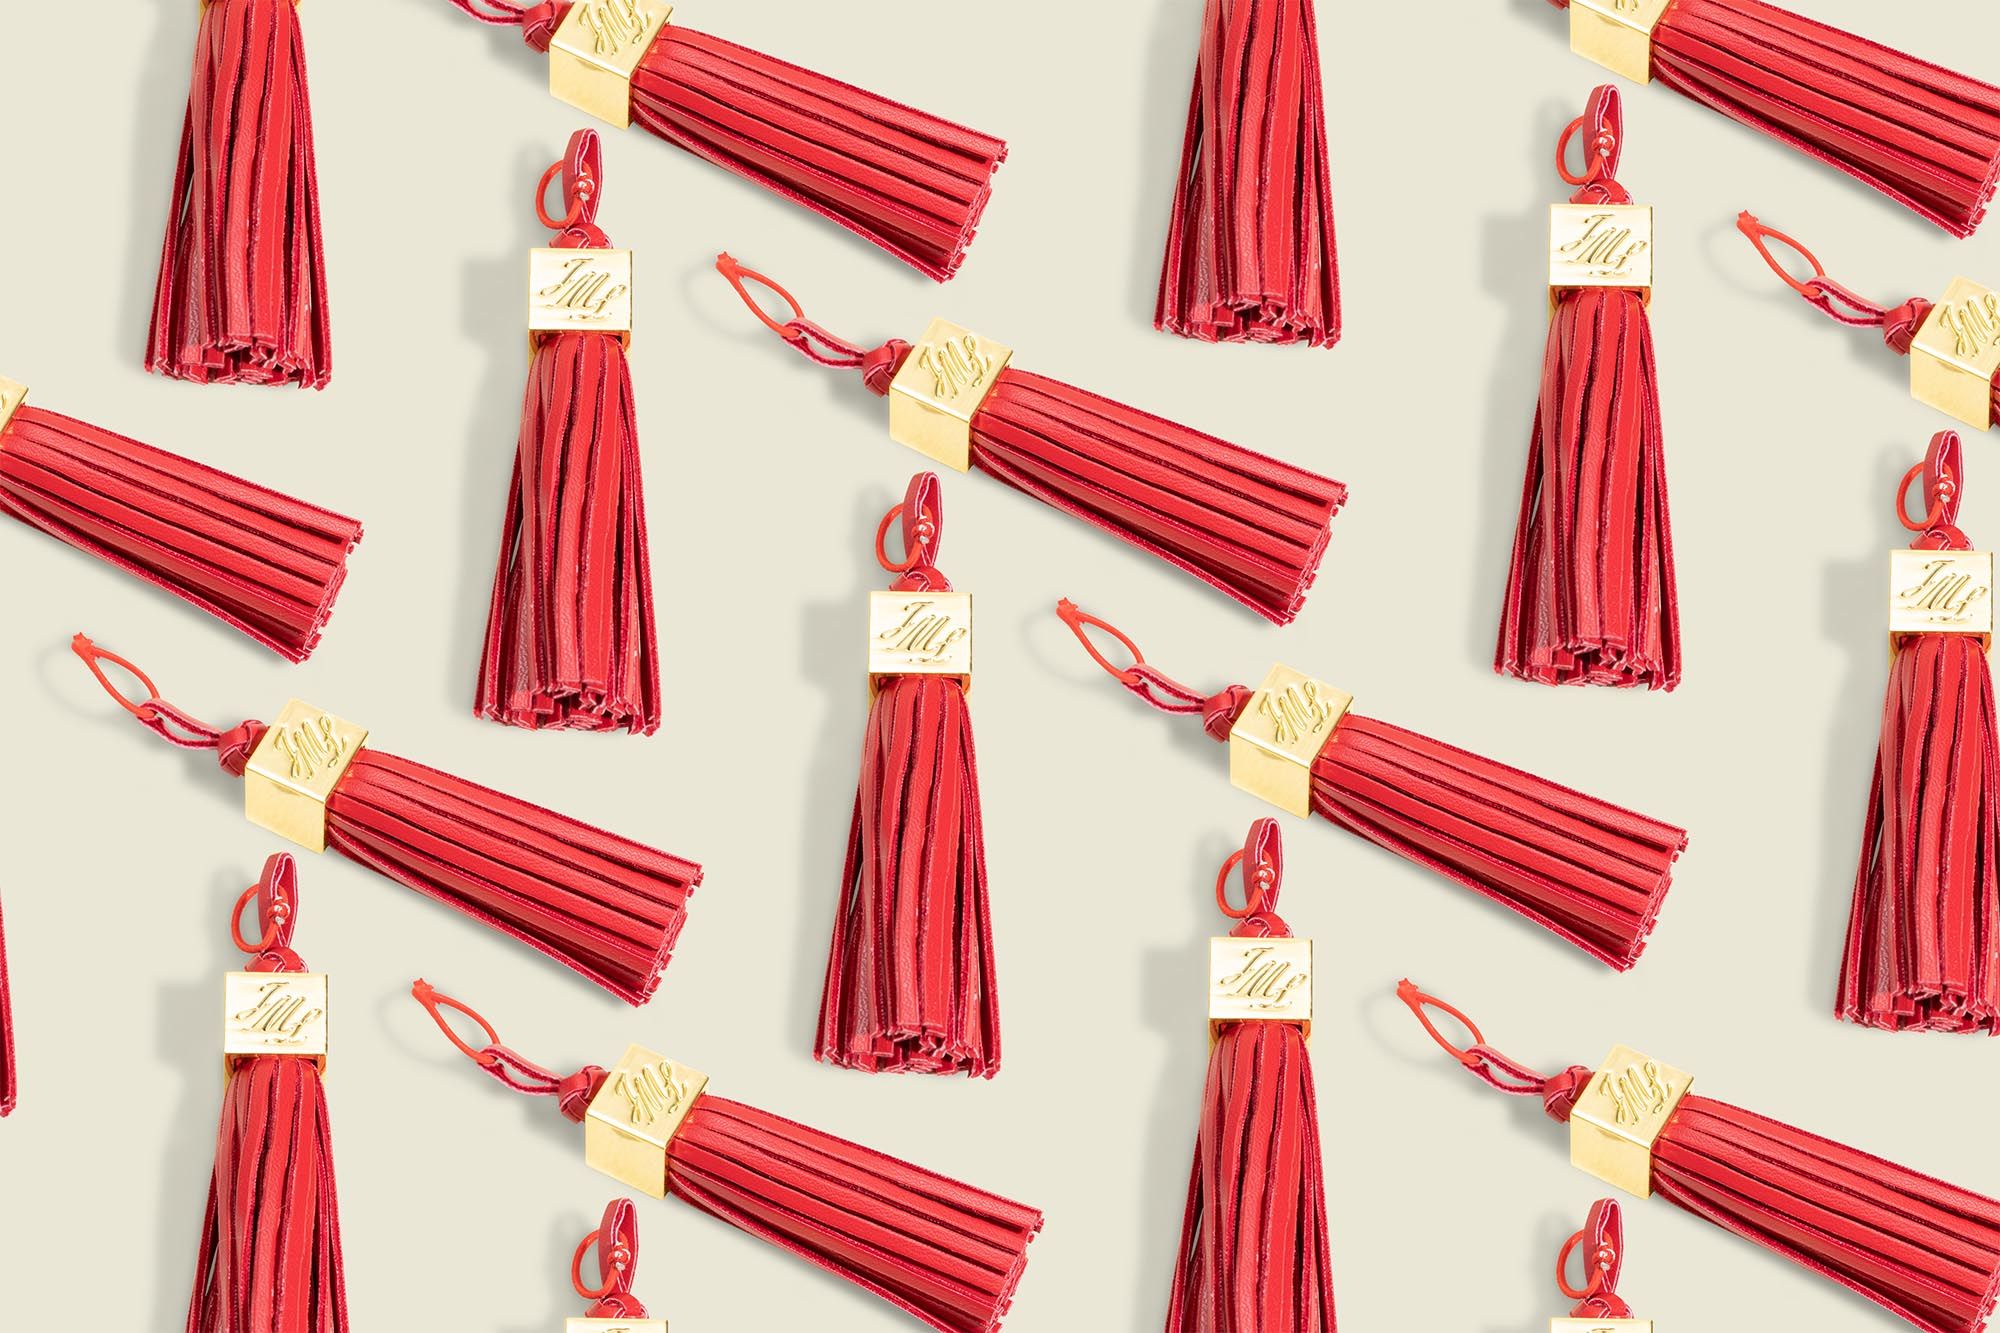 Red tassle with metal details